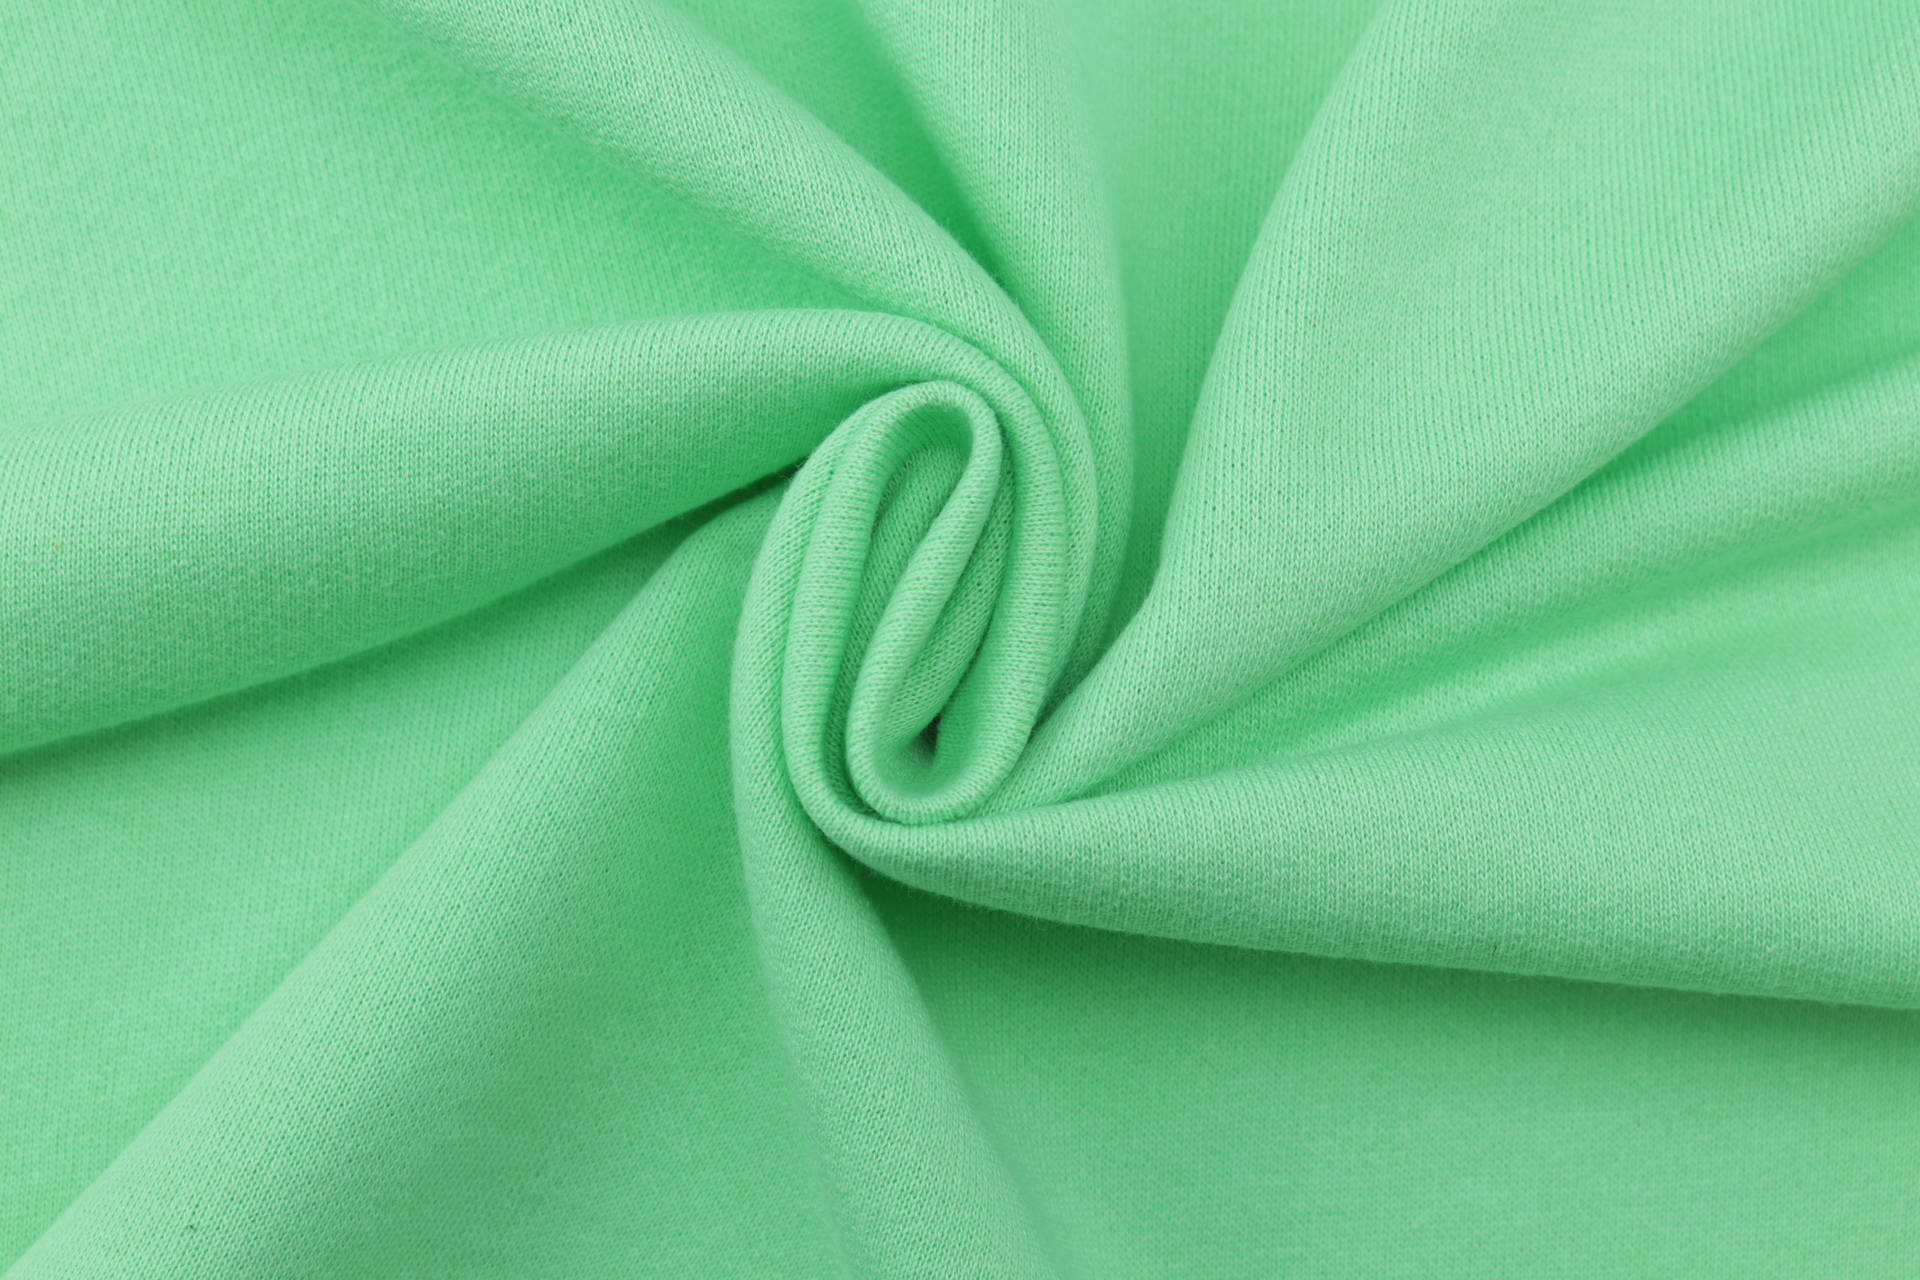 Mint Green 6000X4000 Wallpaper and Background Image